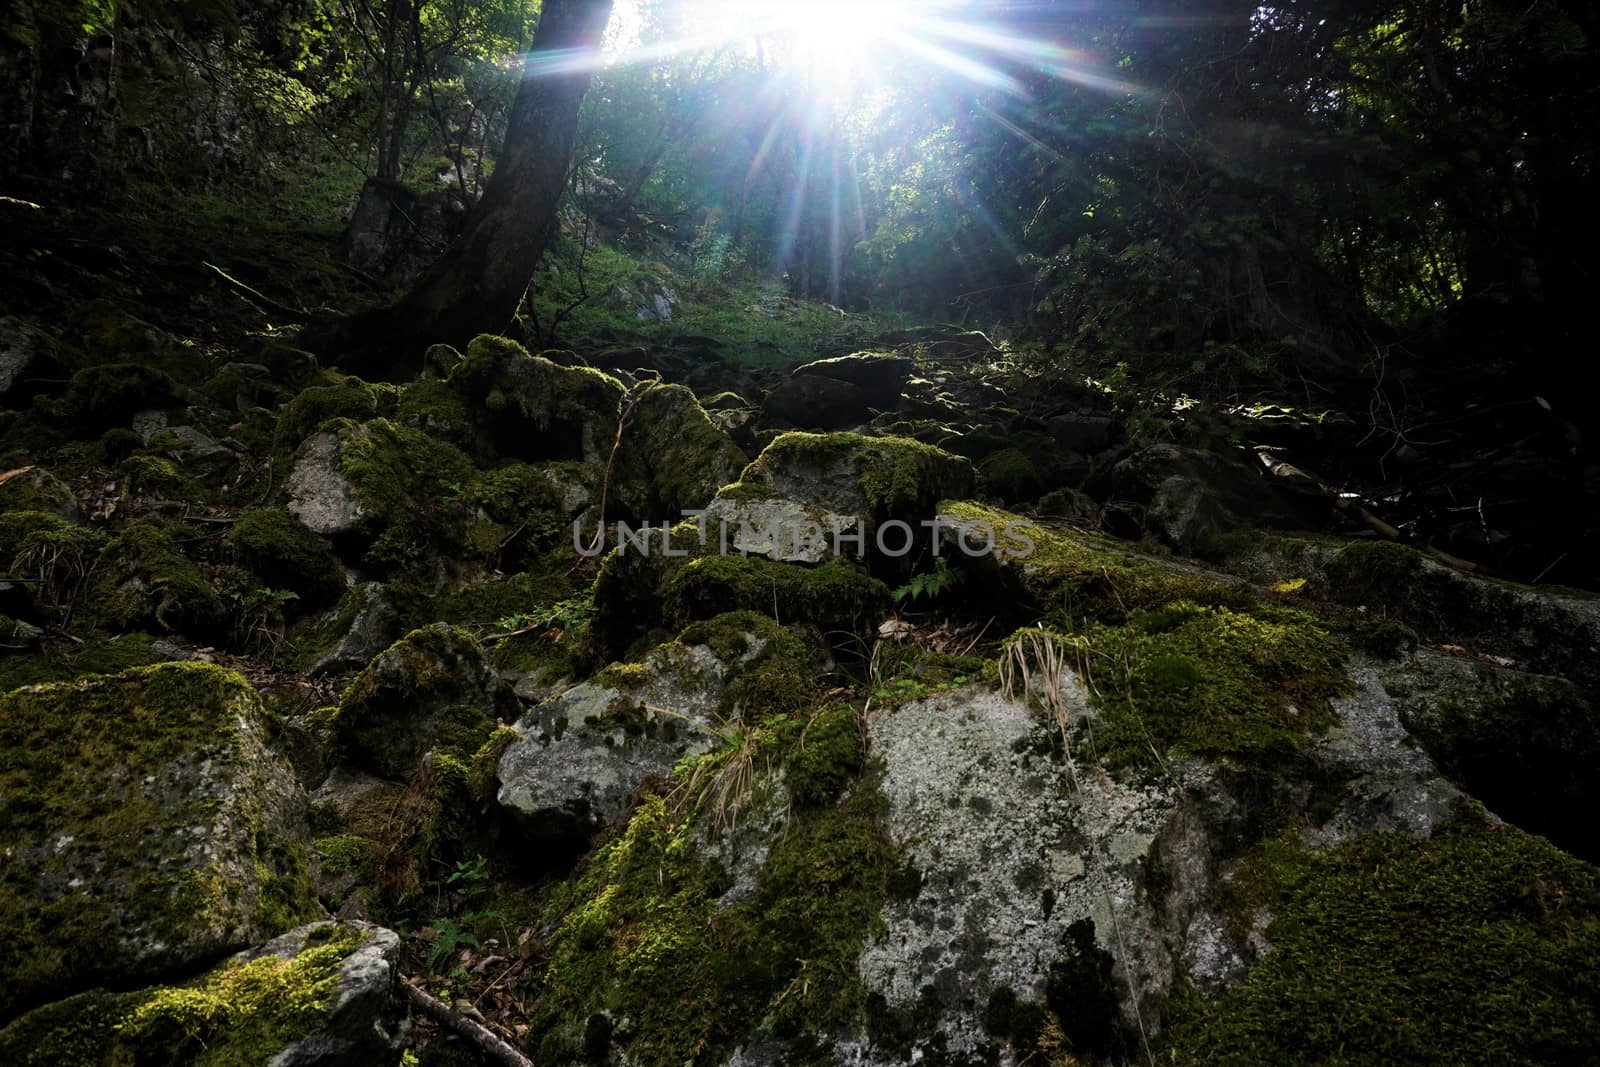 Rays of sunlight over mossy scree spotted in the Vosges, France